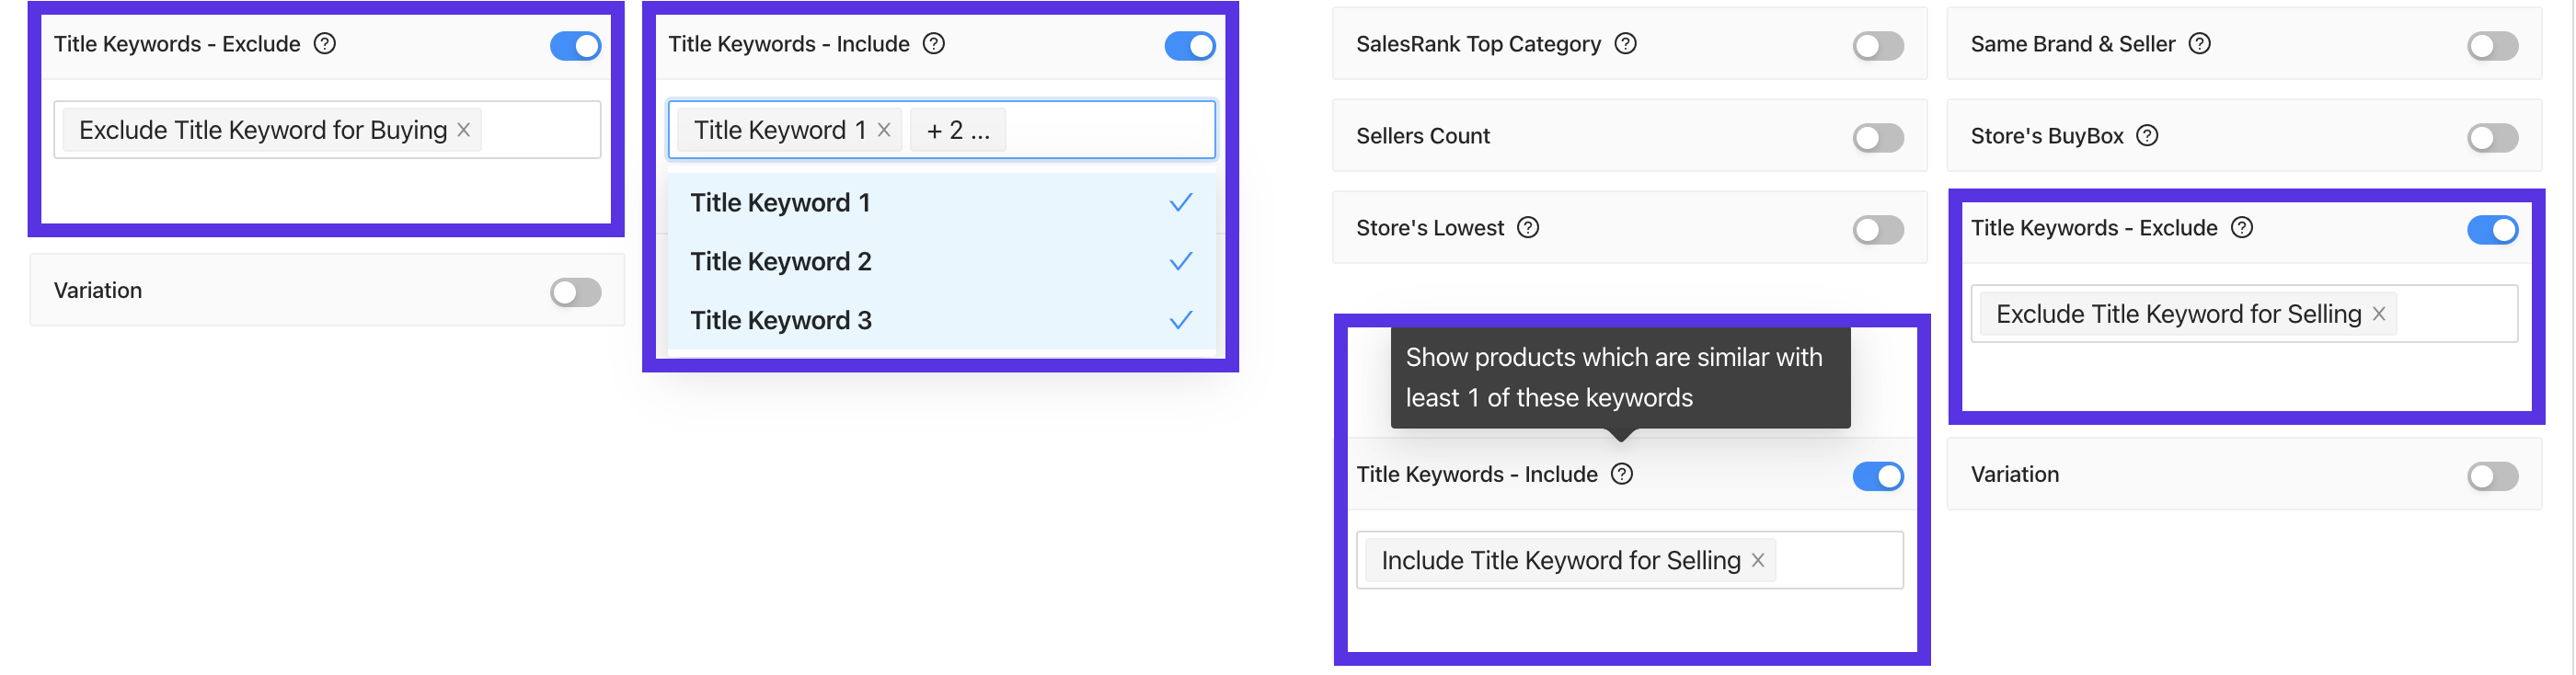 Include Exclude Title Keywords